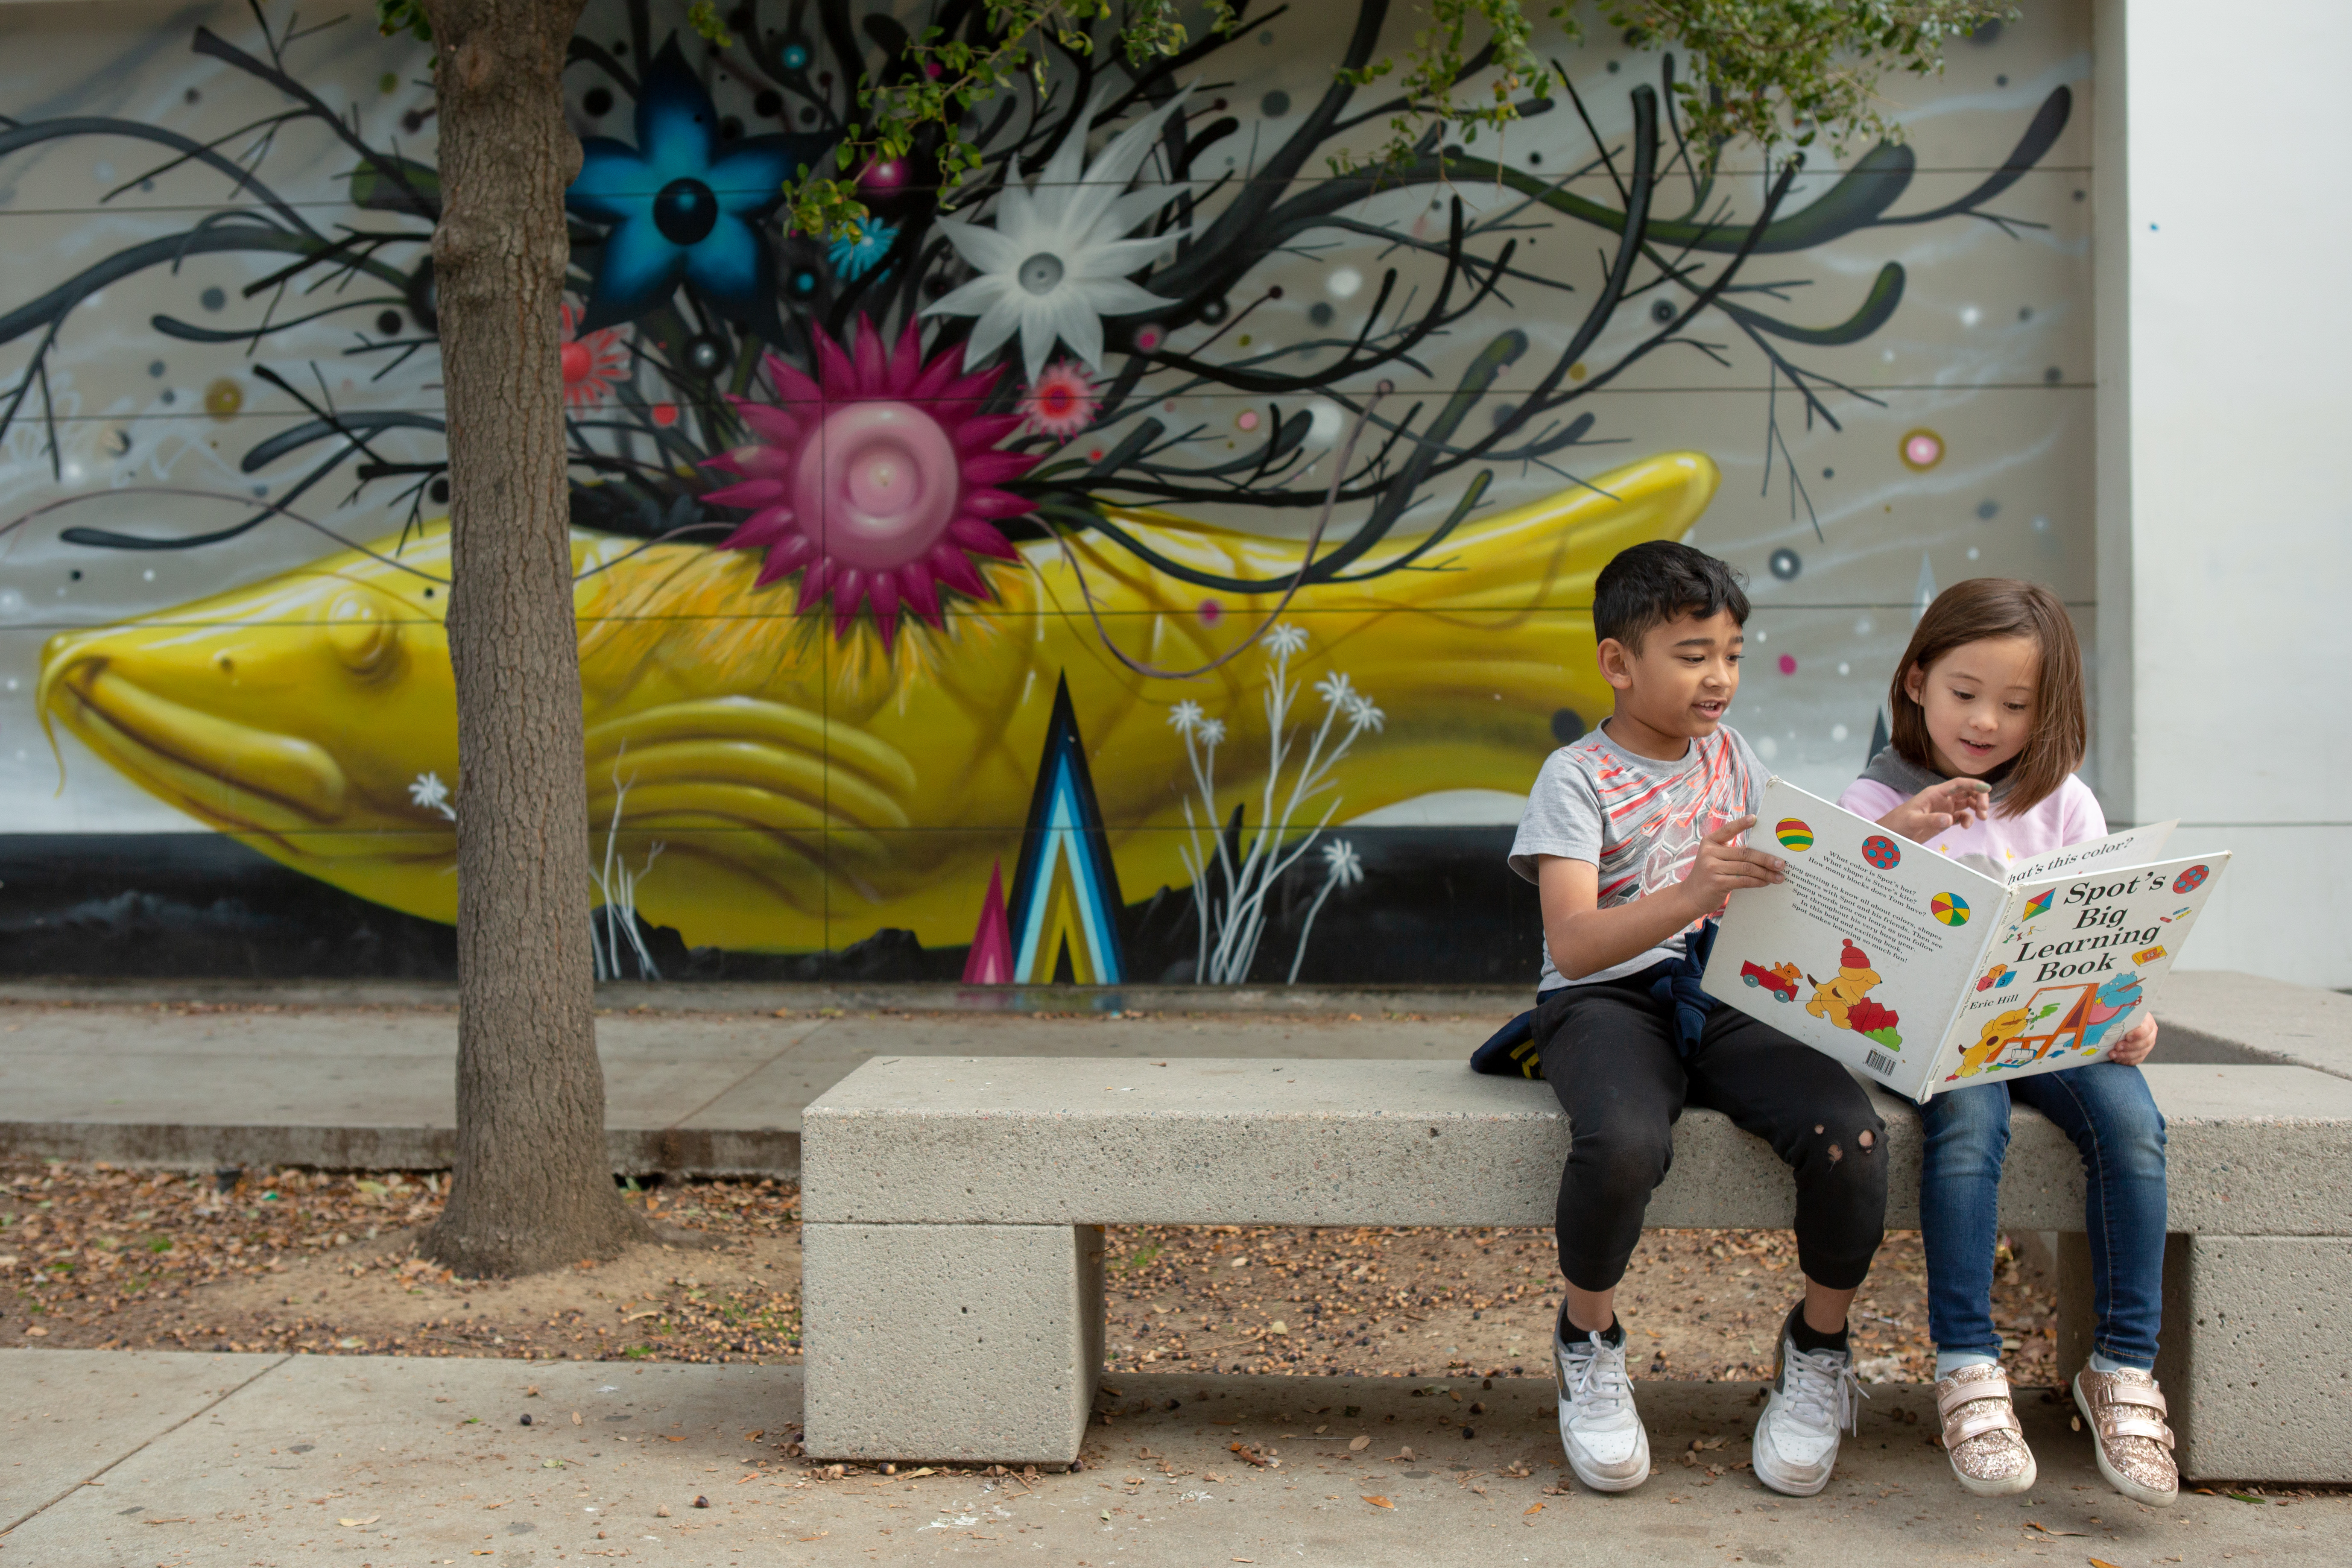 A boy and a girl share a picture book while sitting on a concrete bench in front of a concrete wall and a sculpture of a large yellow fish with a tangle of dark seaweed growing up from its back with blue, magenta and white flowers interspersed.